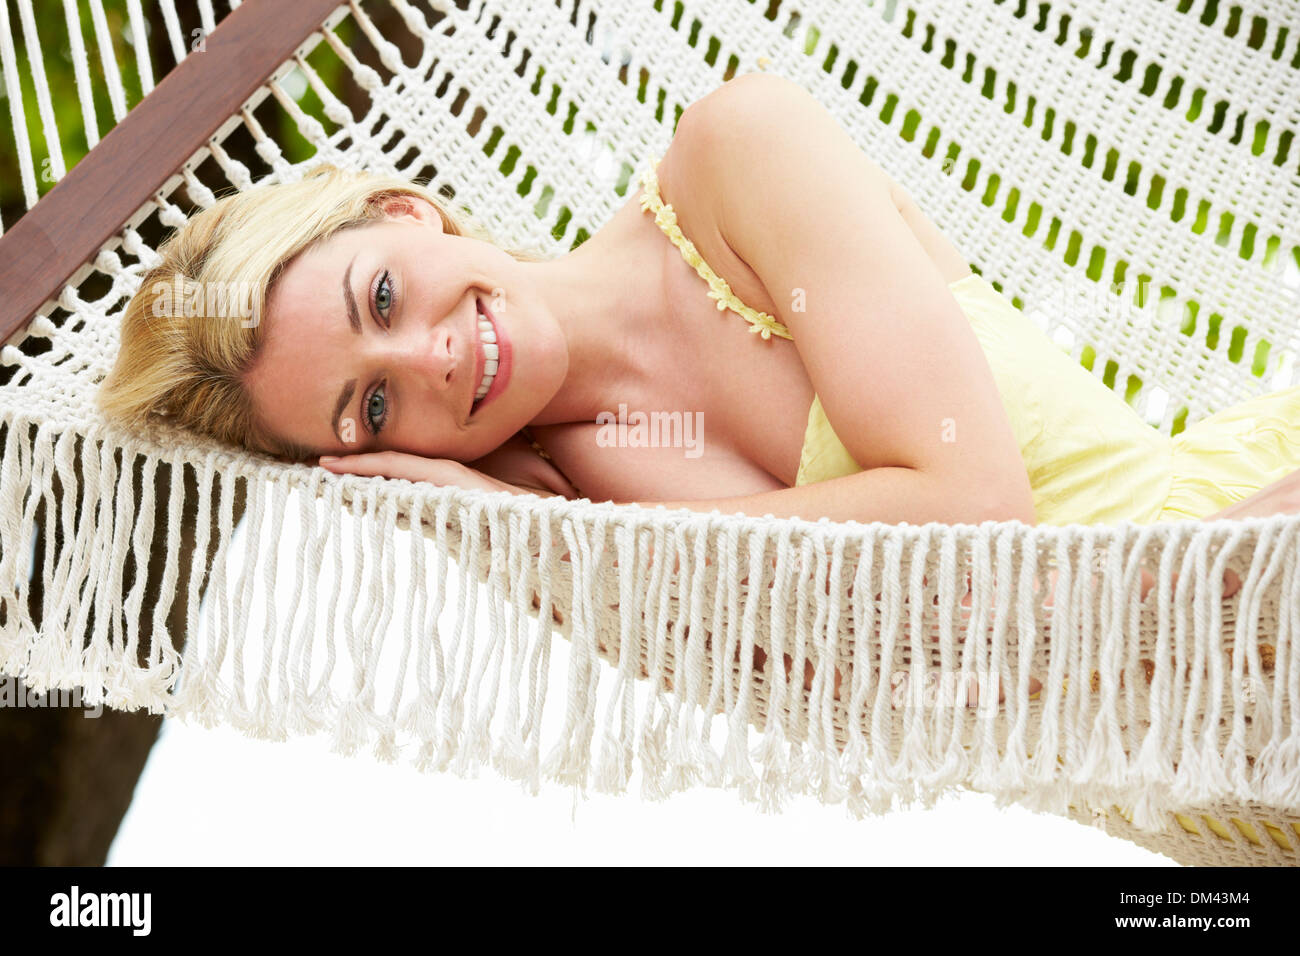 Woman Relaxing In Hammock Beach Banque D'Images